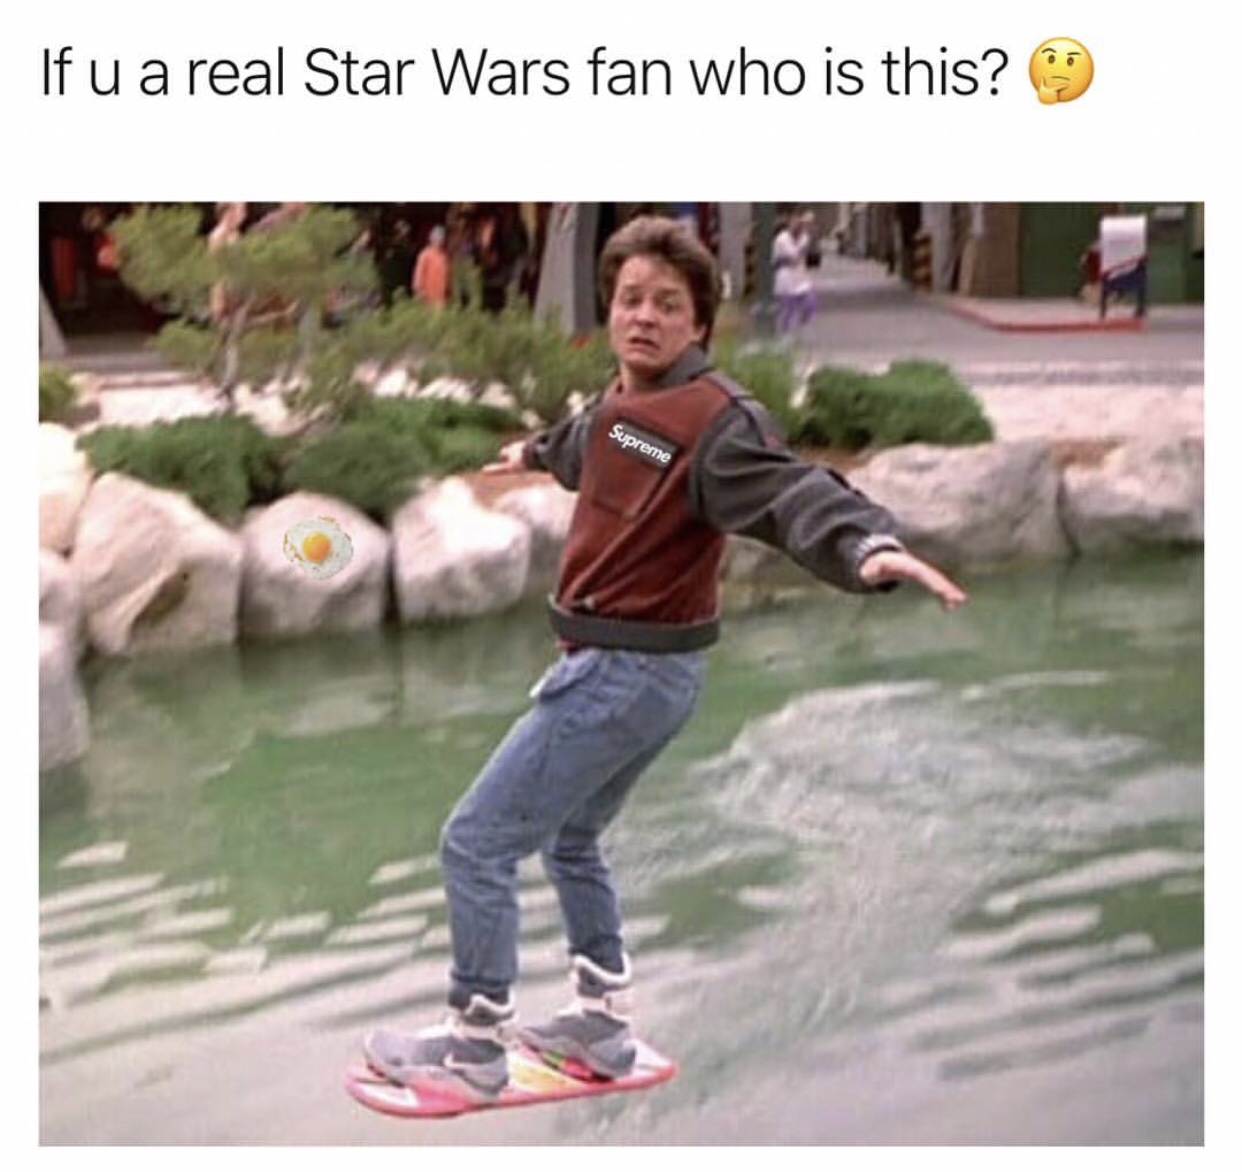 back to the future hover board - If u a real Star Wars fan who is this? 99 Supreme